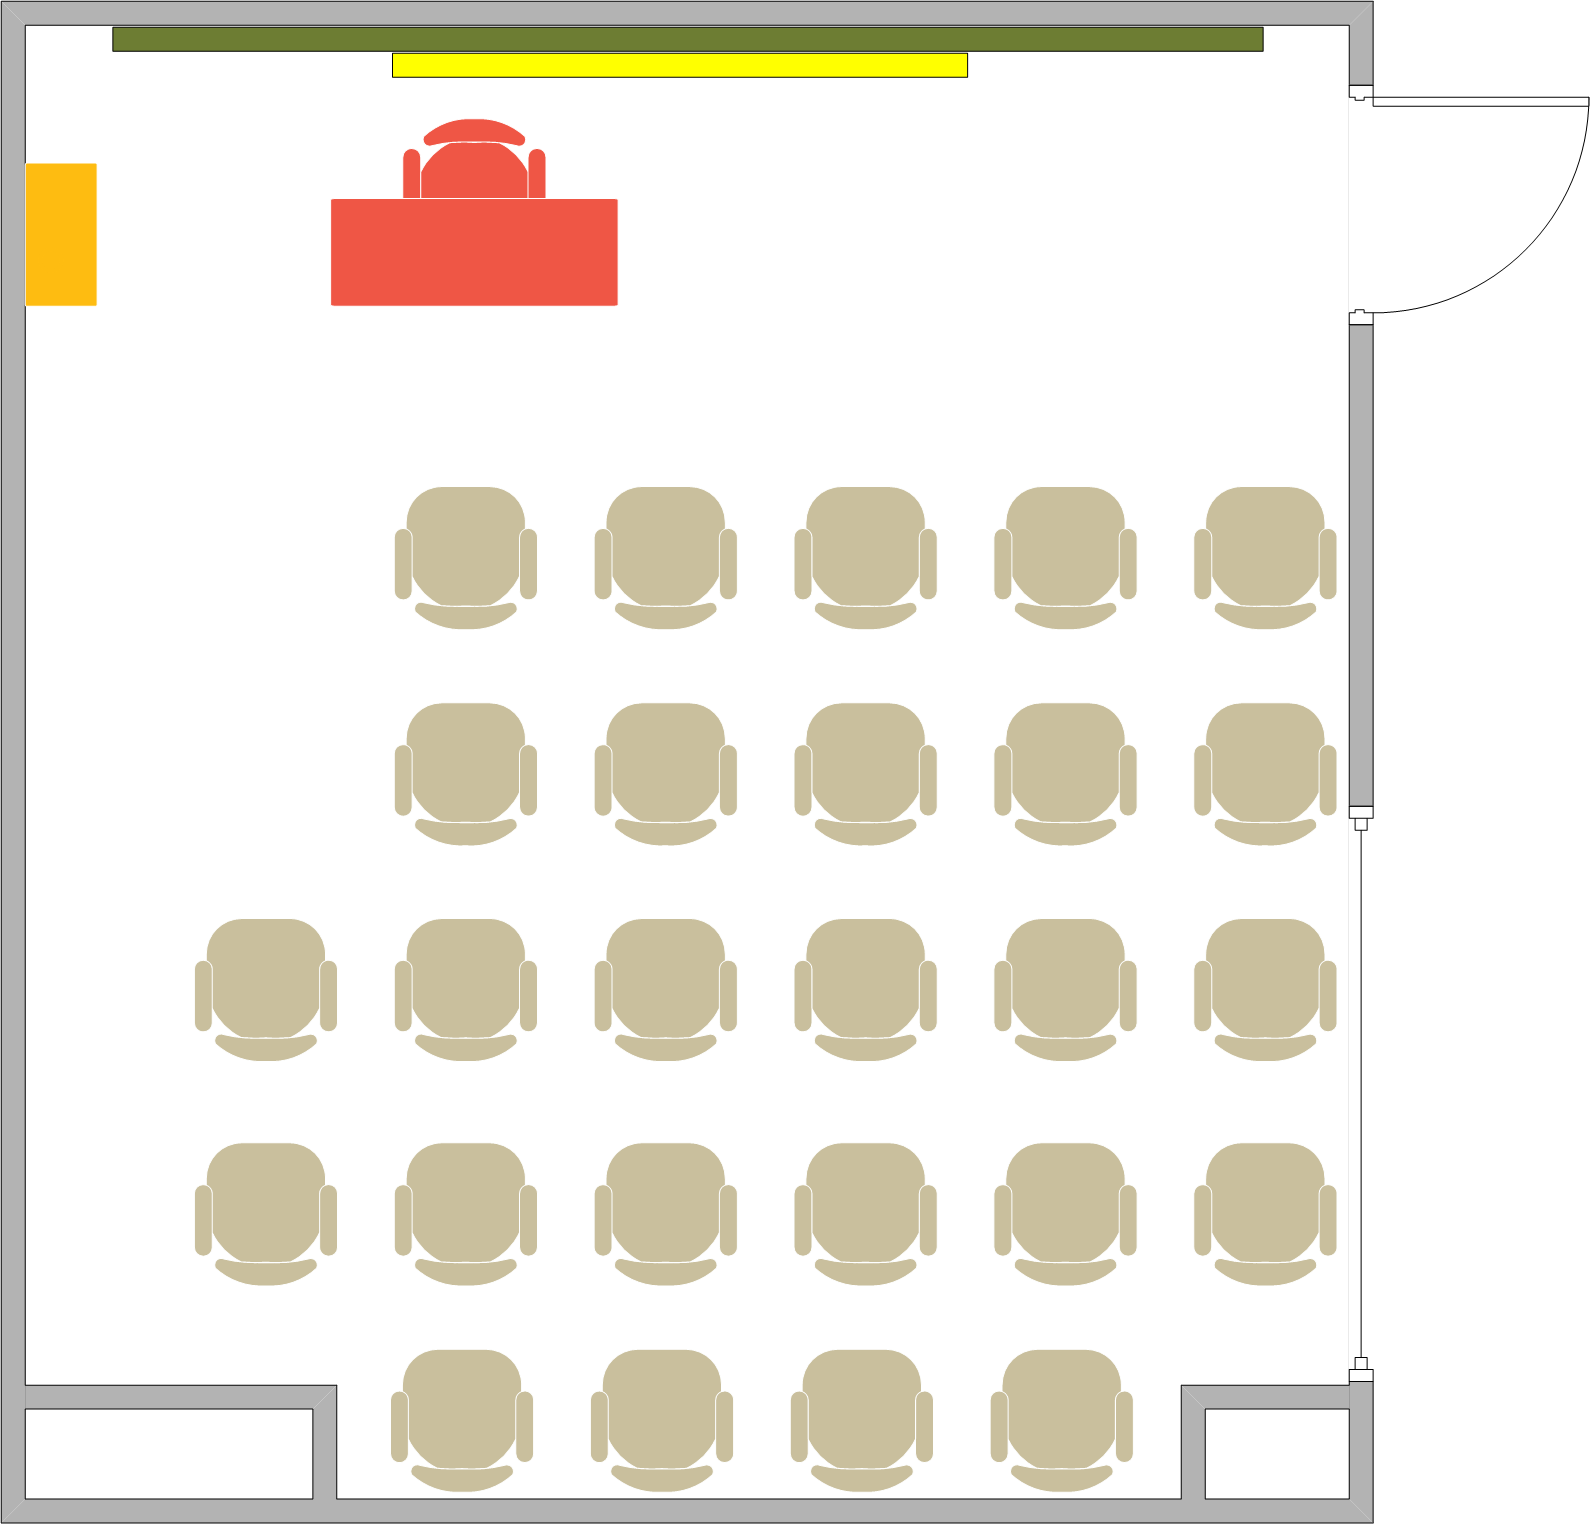 Humanities And Social Sciences Building - 1207 Seating Chart